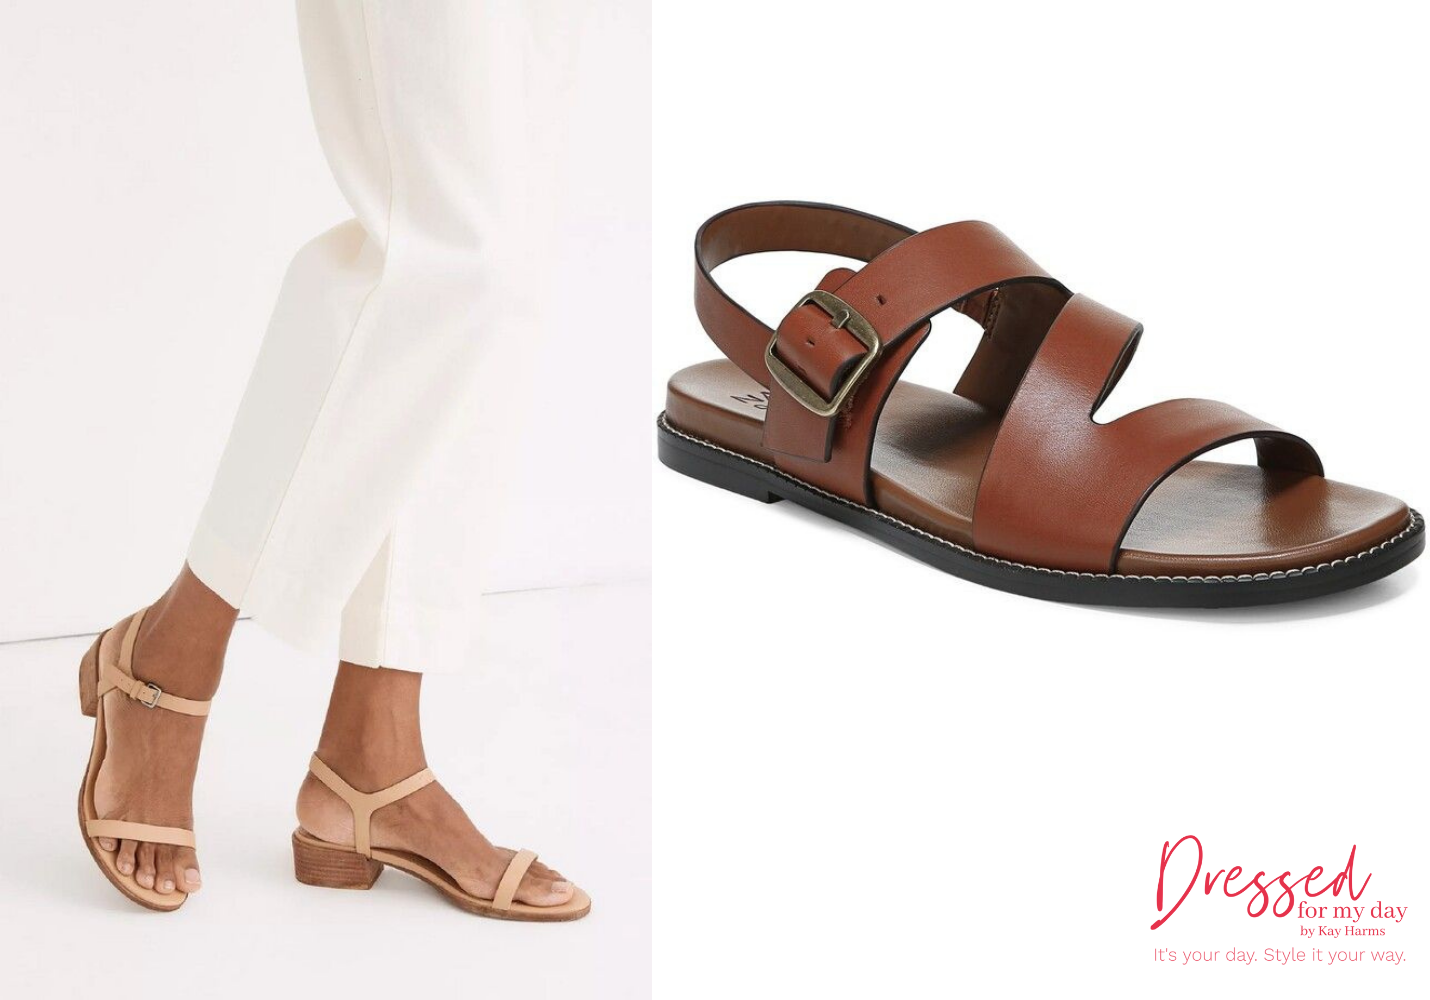 Brown or nude sandals